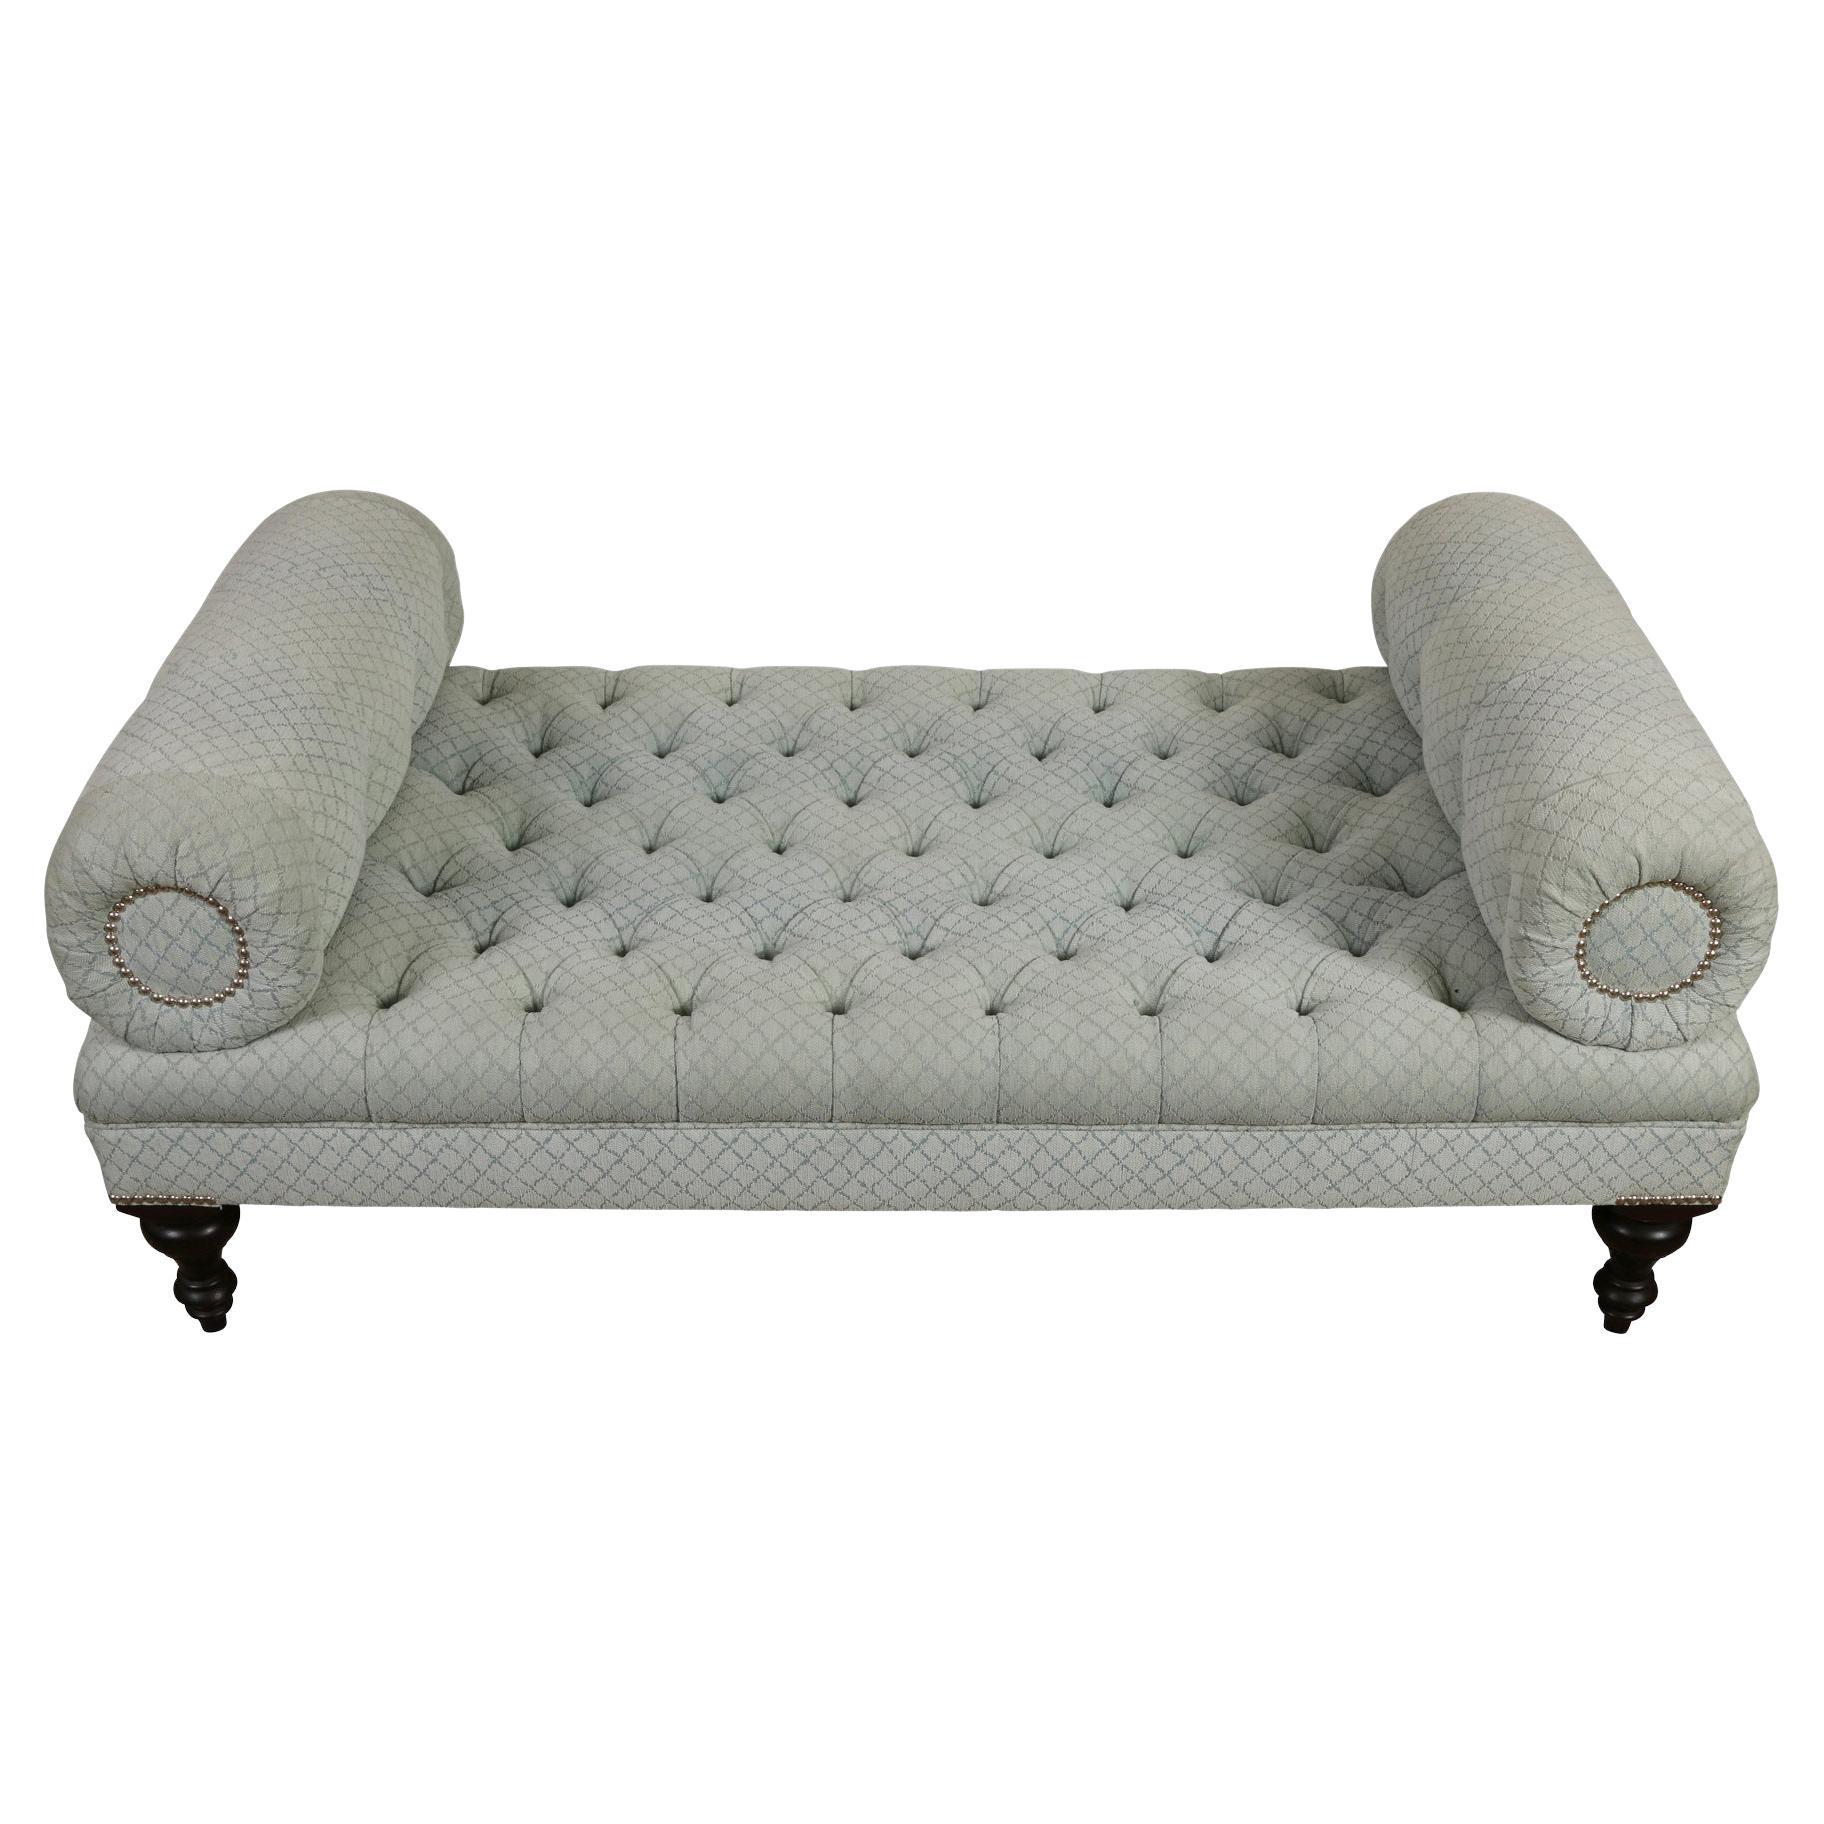 George Smith Tufted Bench with Turned Legs